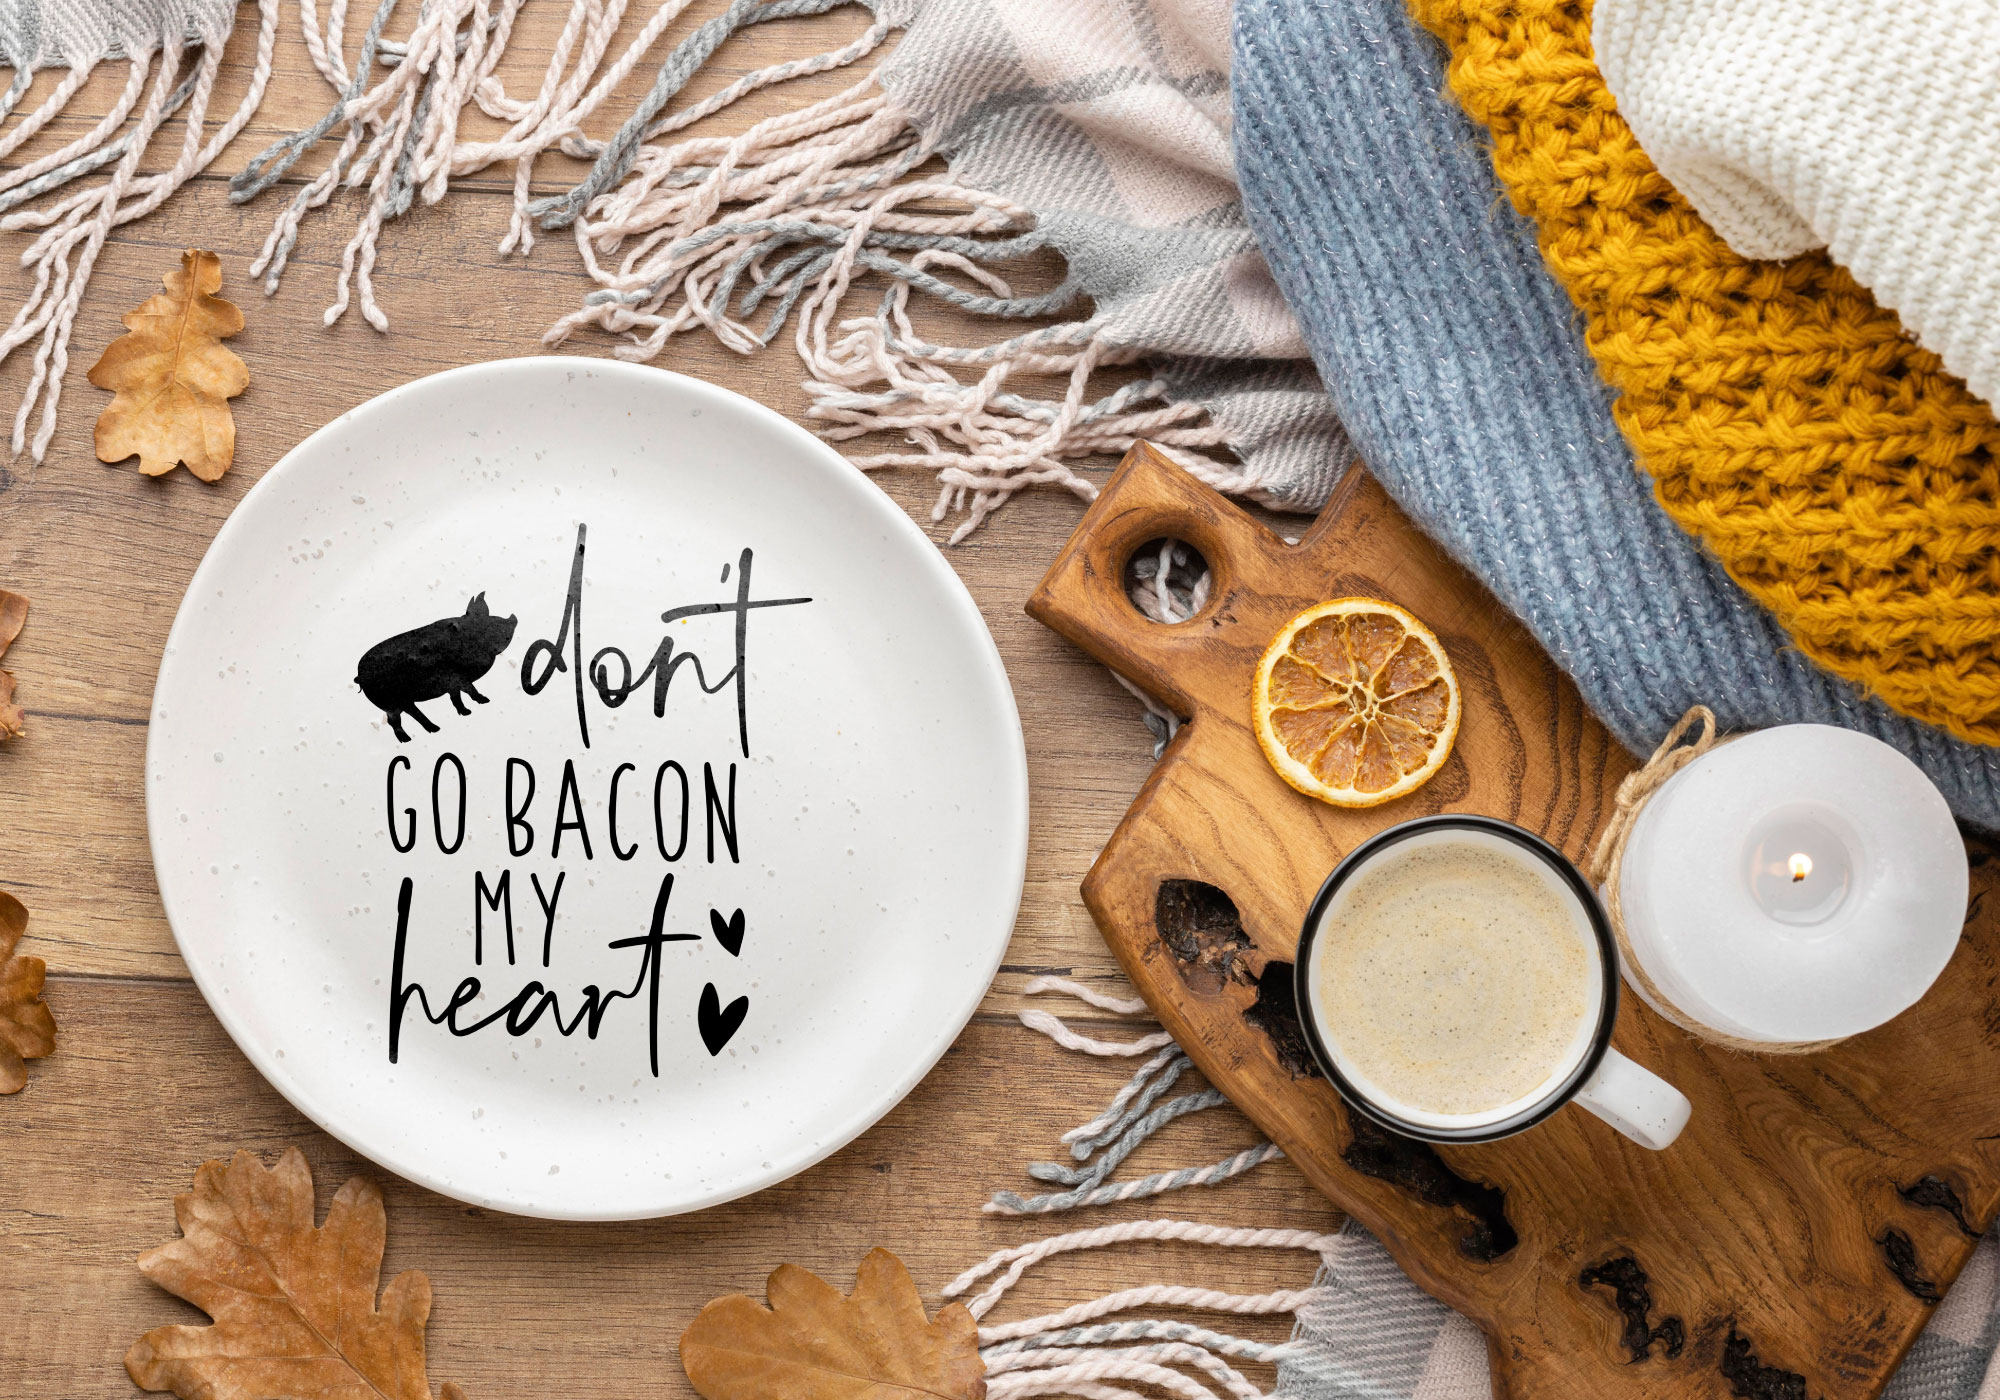 Free Don't Go Bacon My Heart SVG Cut File